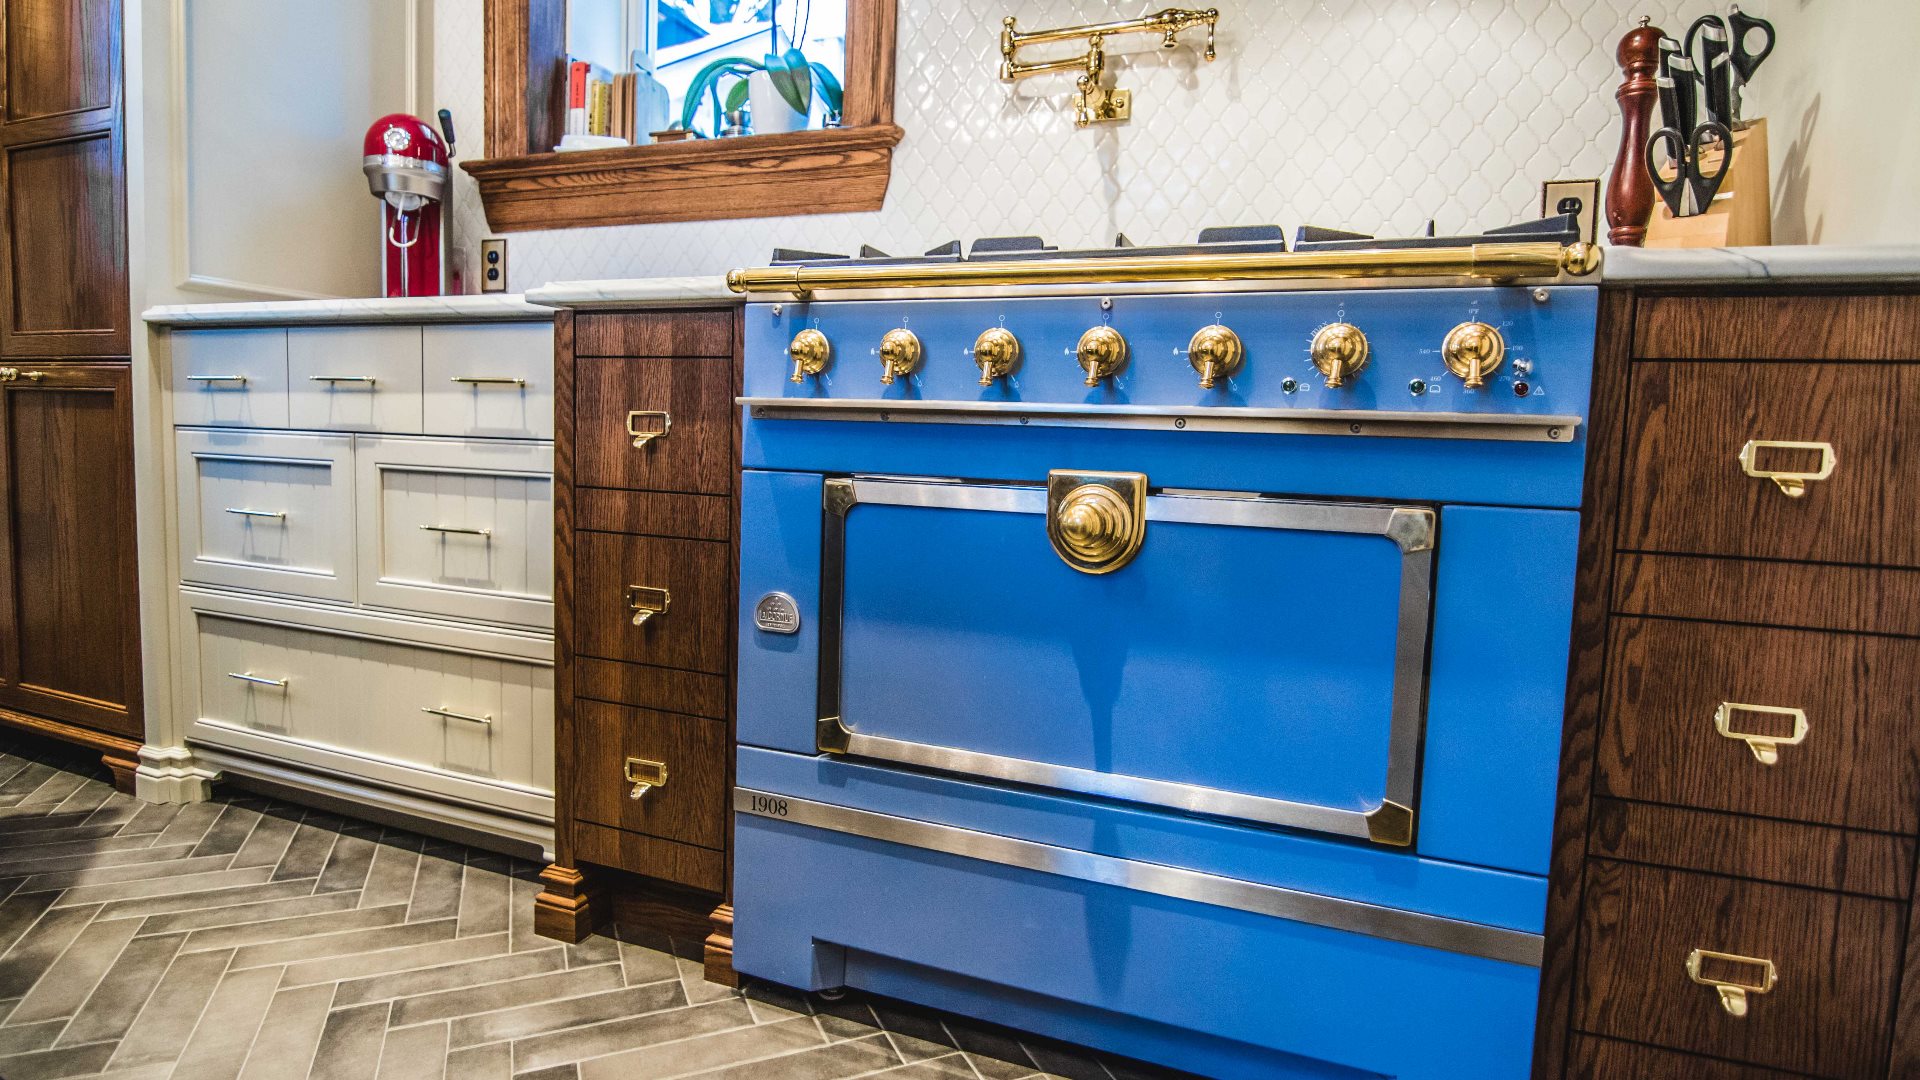 Classic kitchen with oak kitchen cabinets. An imposing blue oven is integrated into the set.